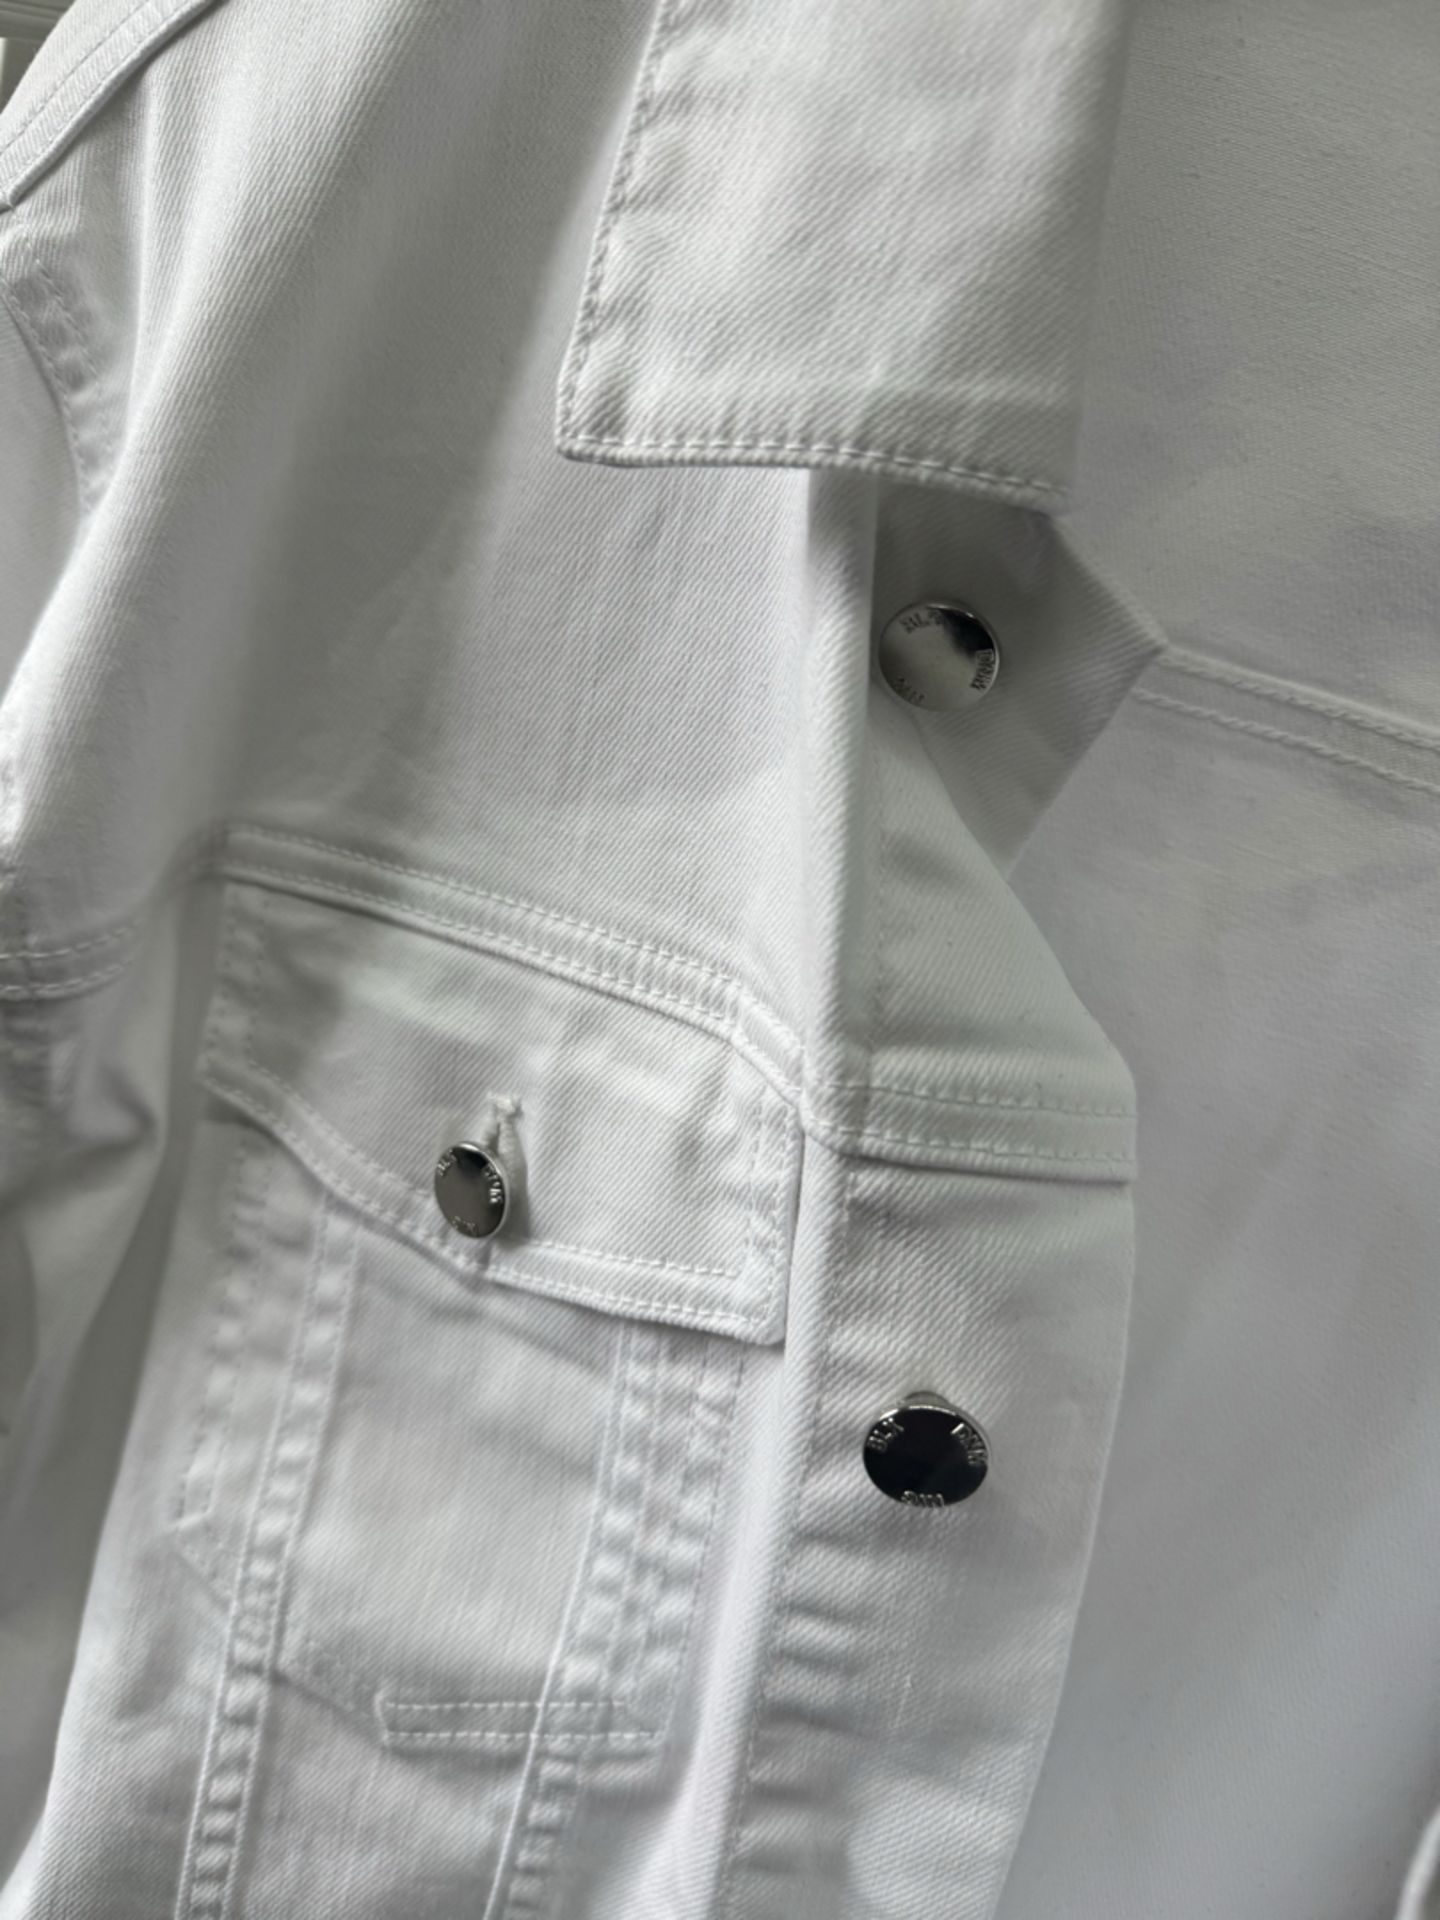 BLK DNM NYC Unisex White Jacket - New with Tags - Size XL - RRP Â£150+ - NO VAT! - Image 3 of 7